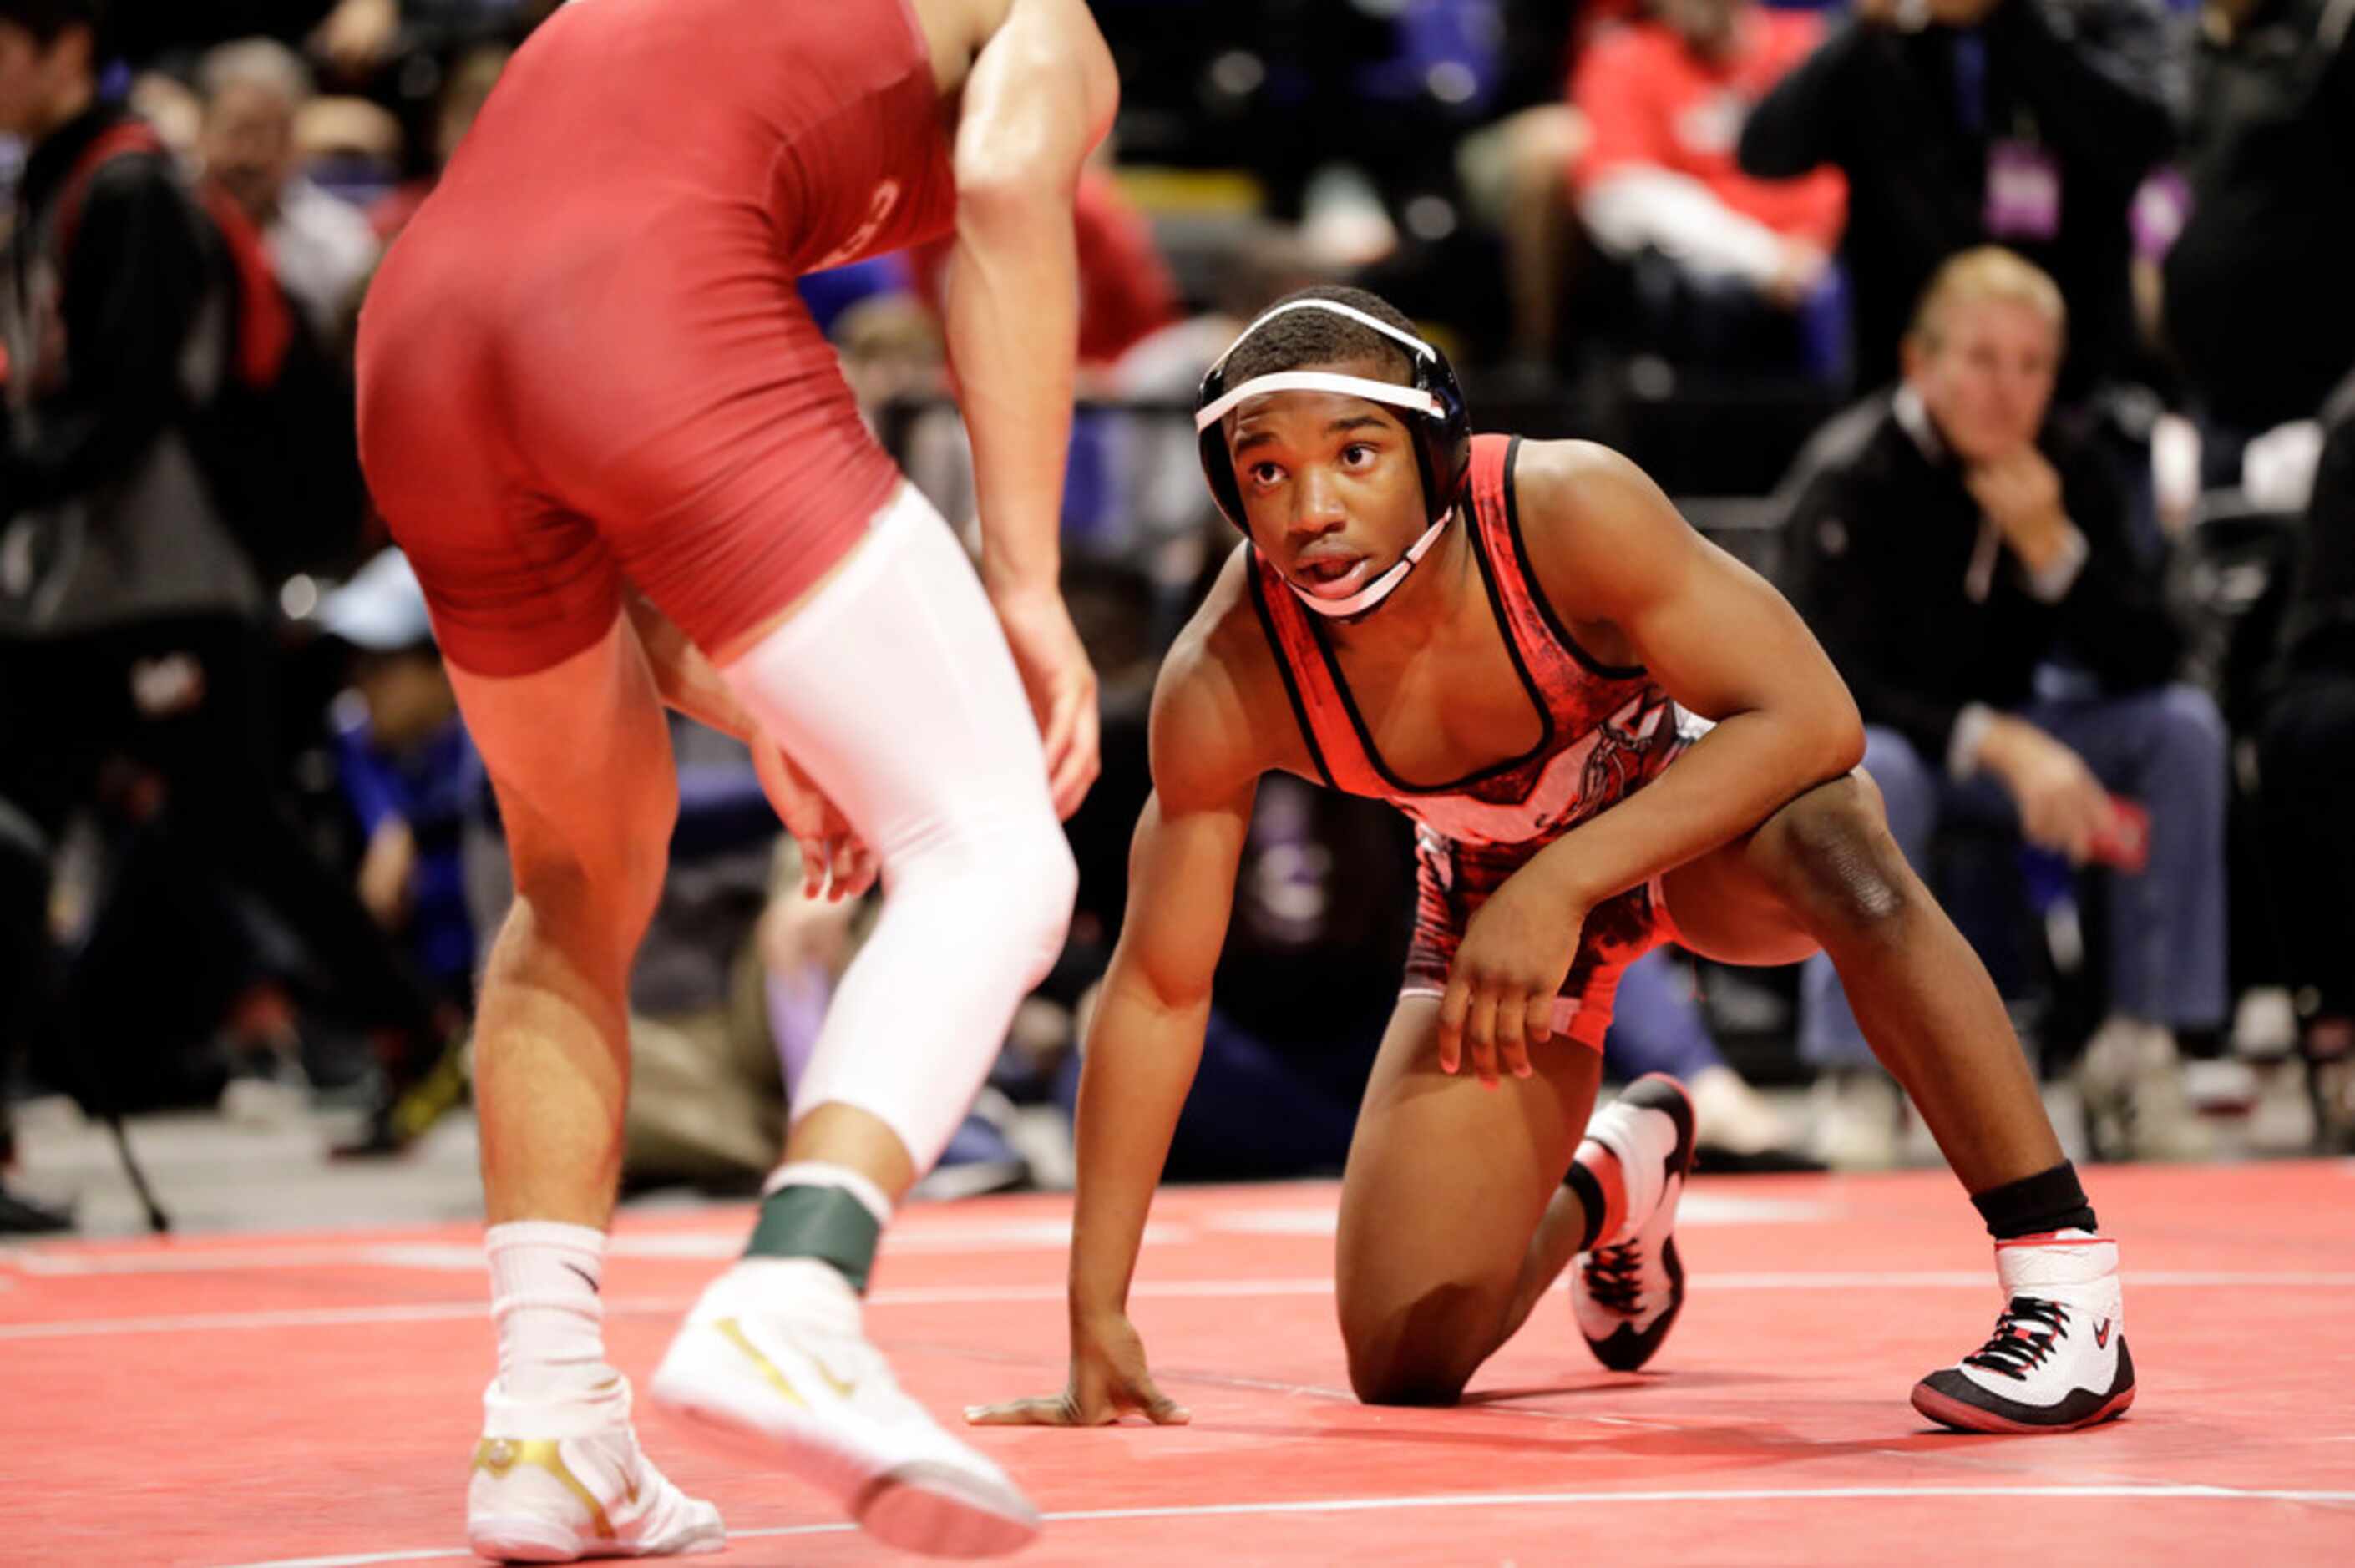 Donovan Whitted of Arlington Martin wrestles during the UIL Texas State Wrestling...